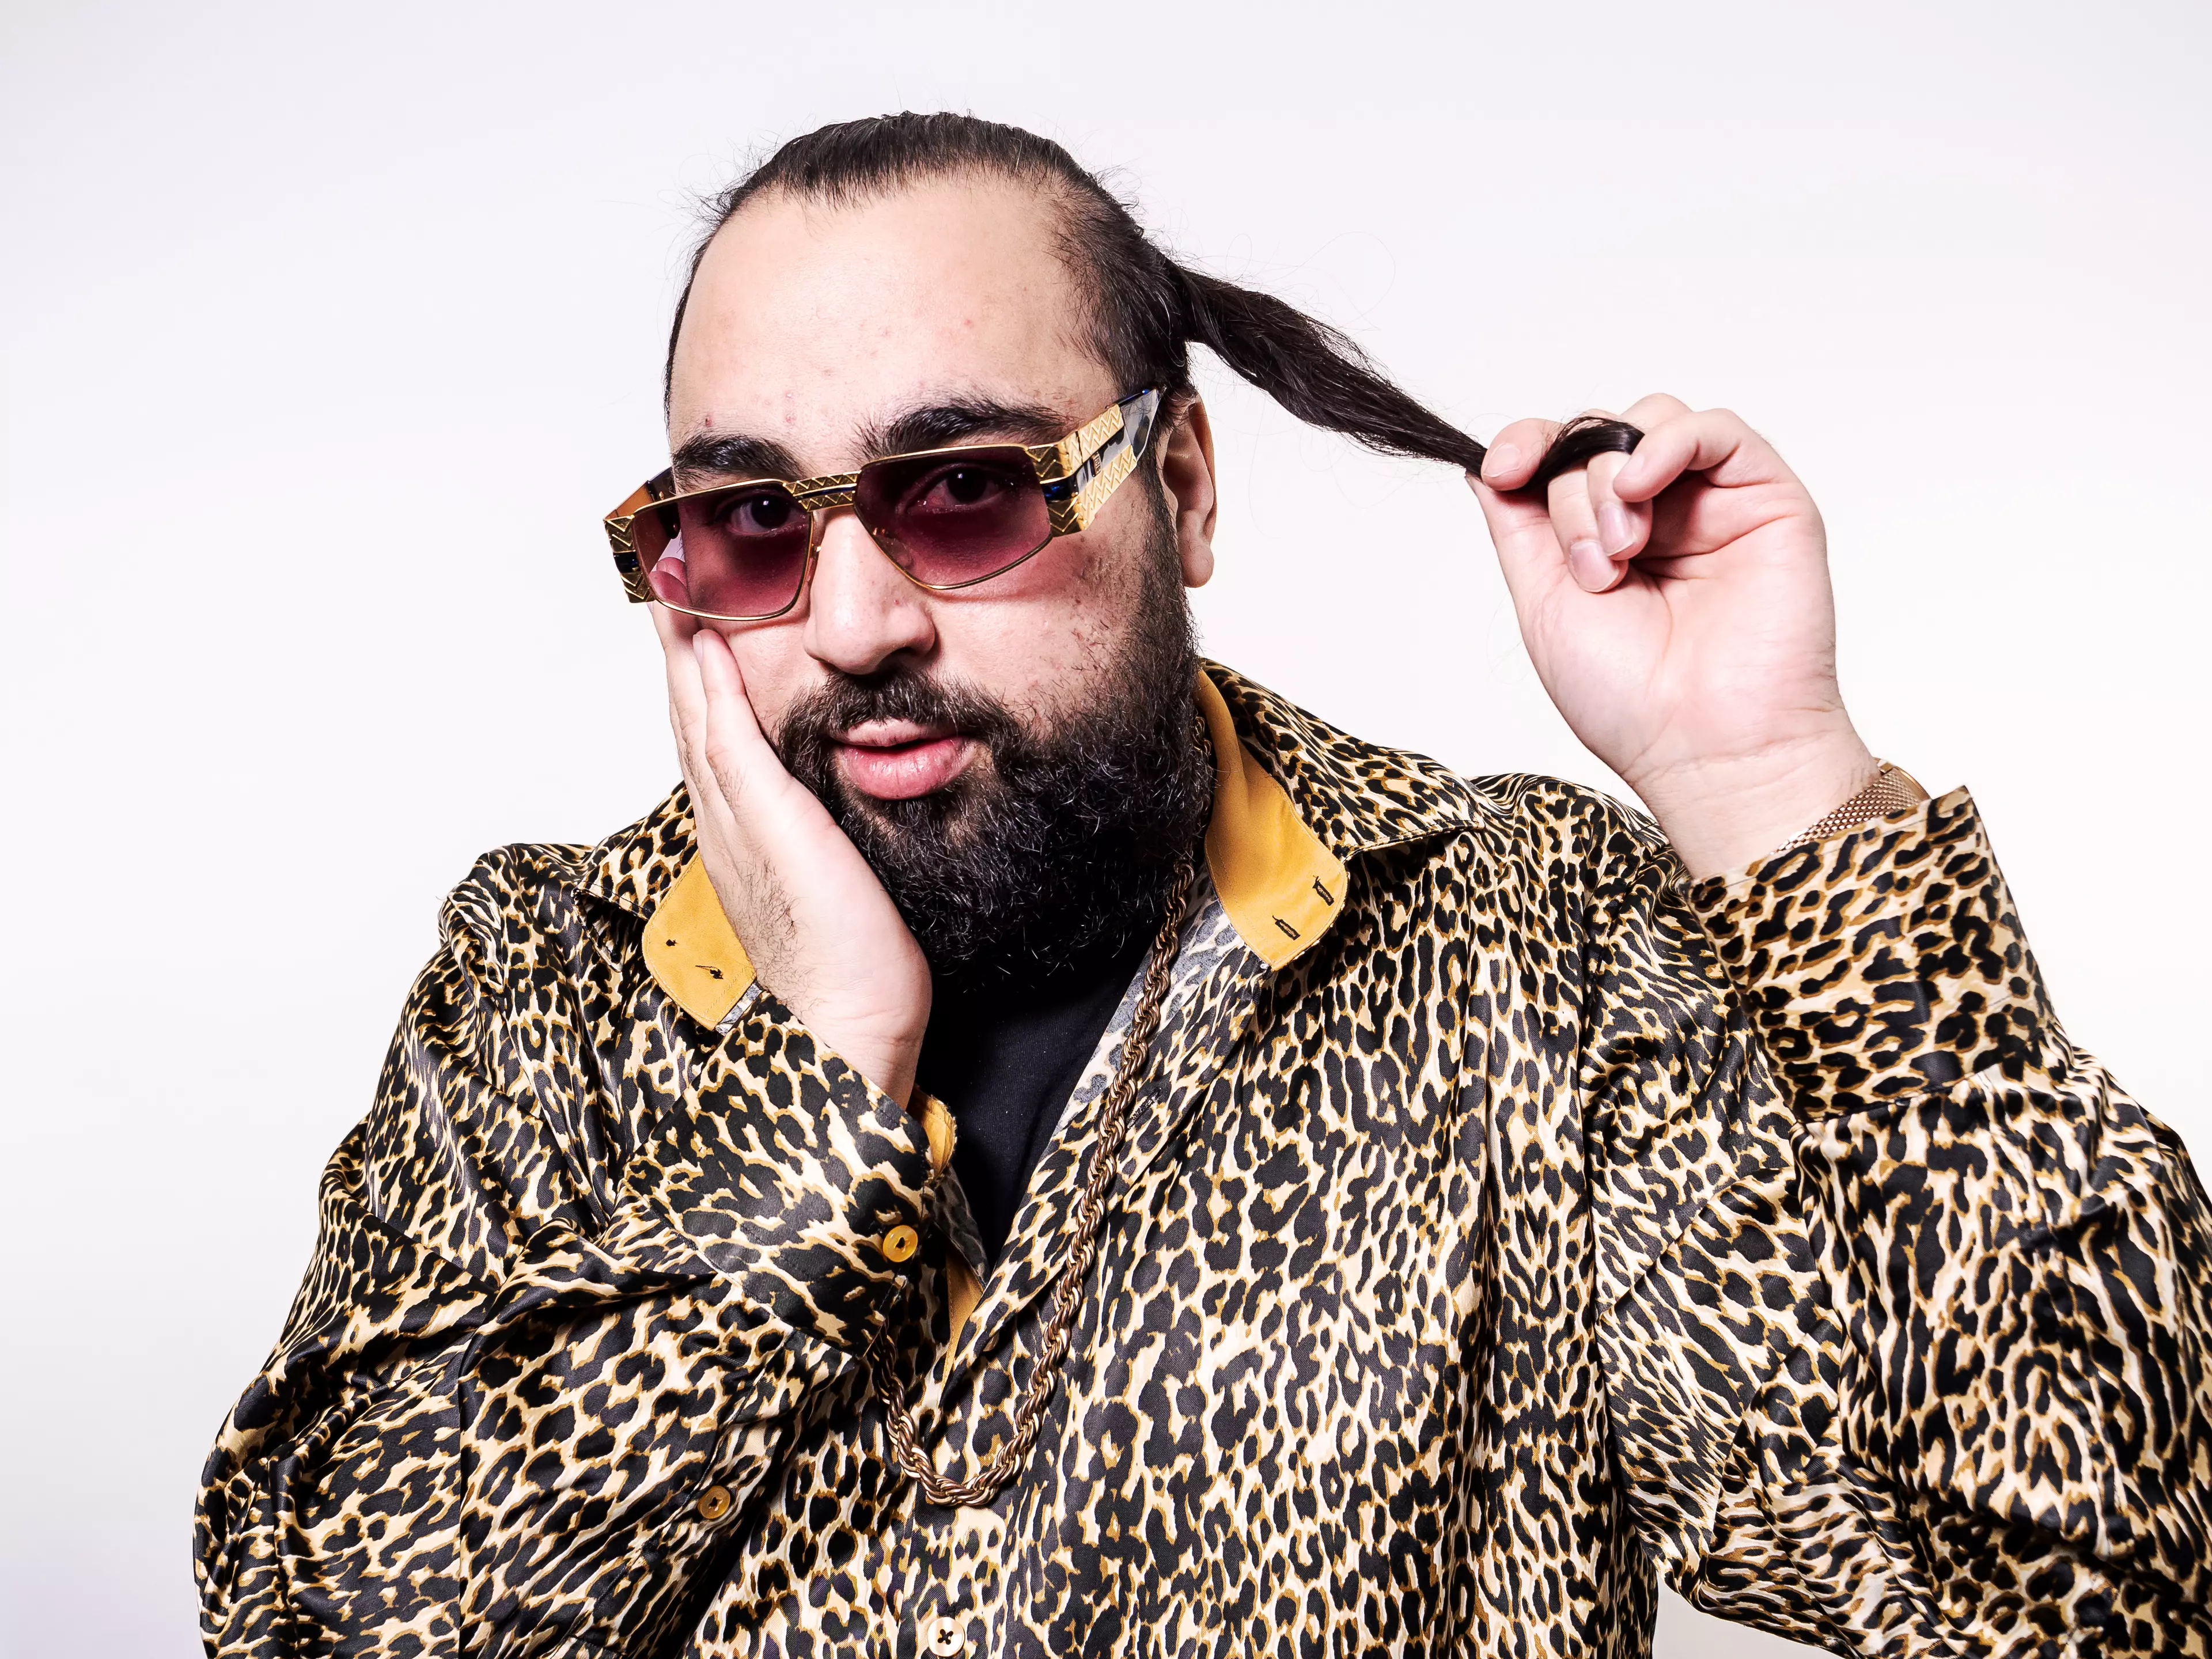 Chabuddy G, played Asim Chaudhry, pictured above.